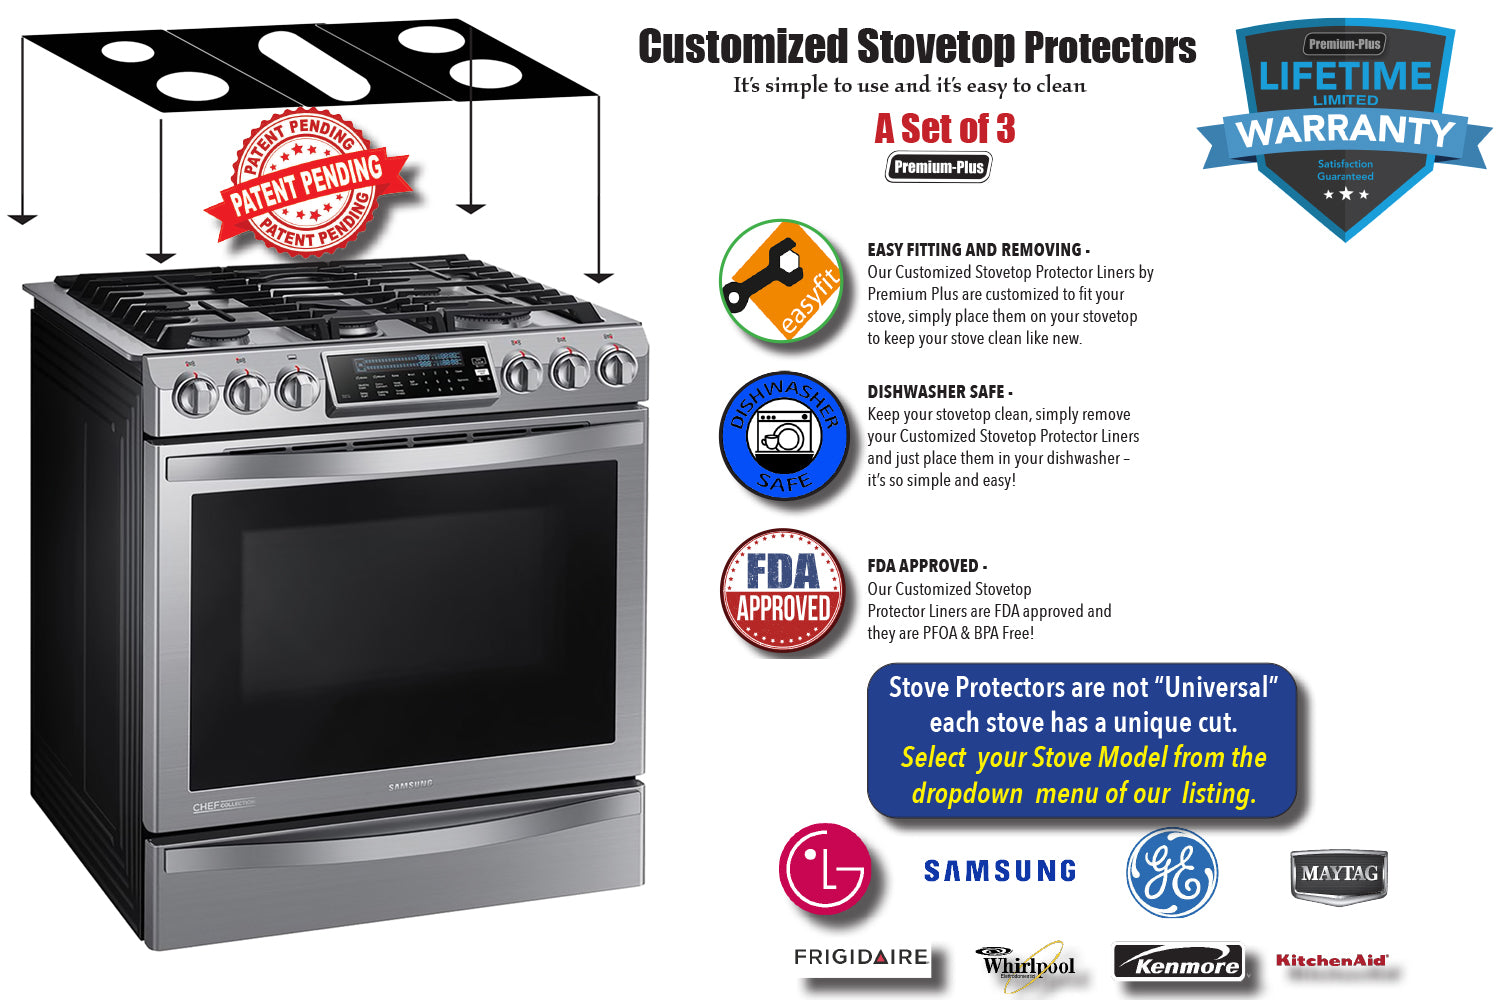 Maytag Stove Protector Liners - Stove Top Protector for Maytag Gas